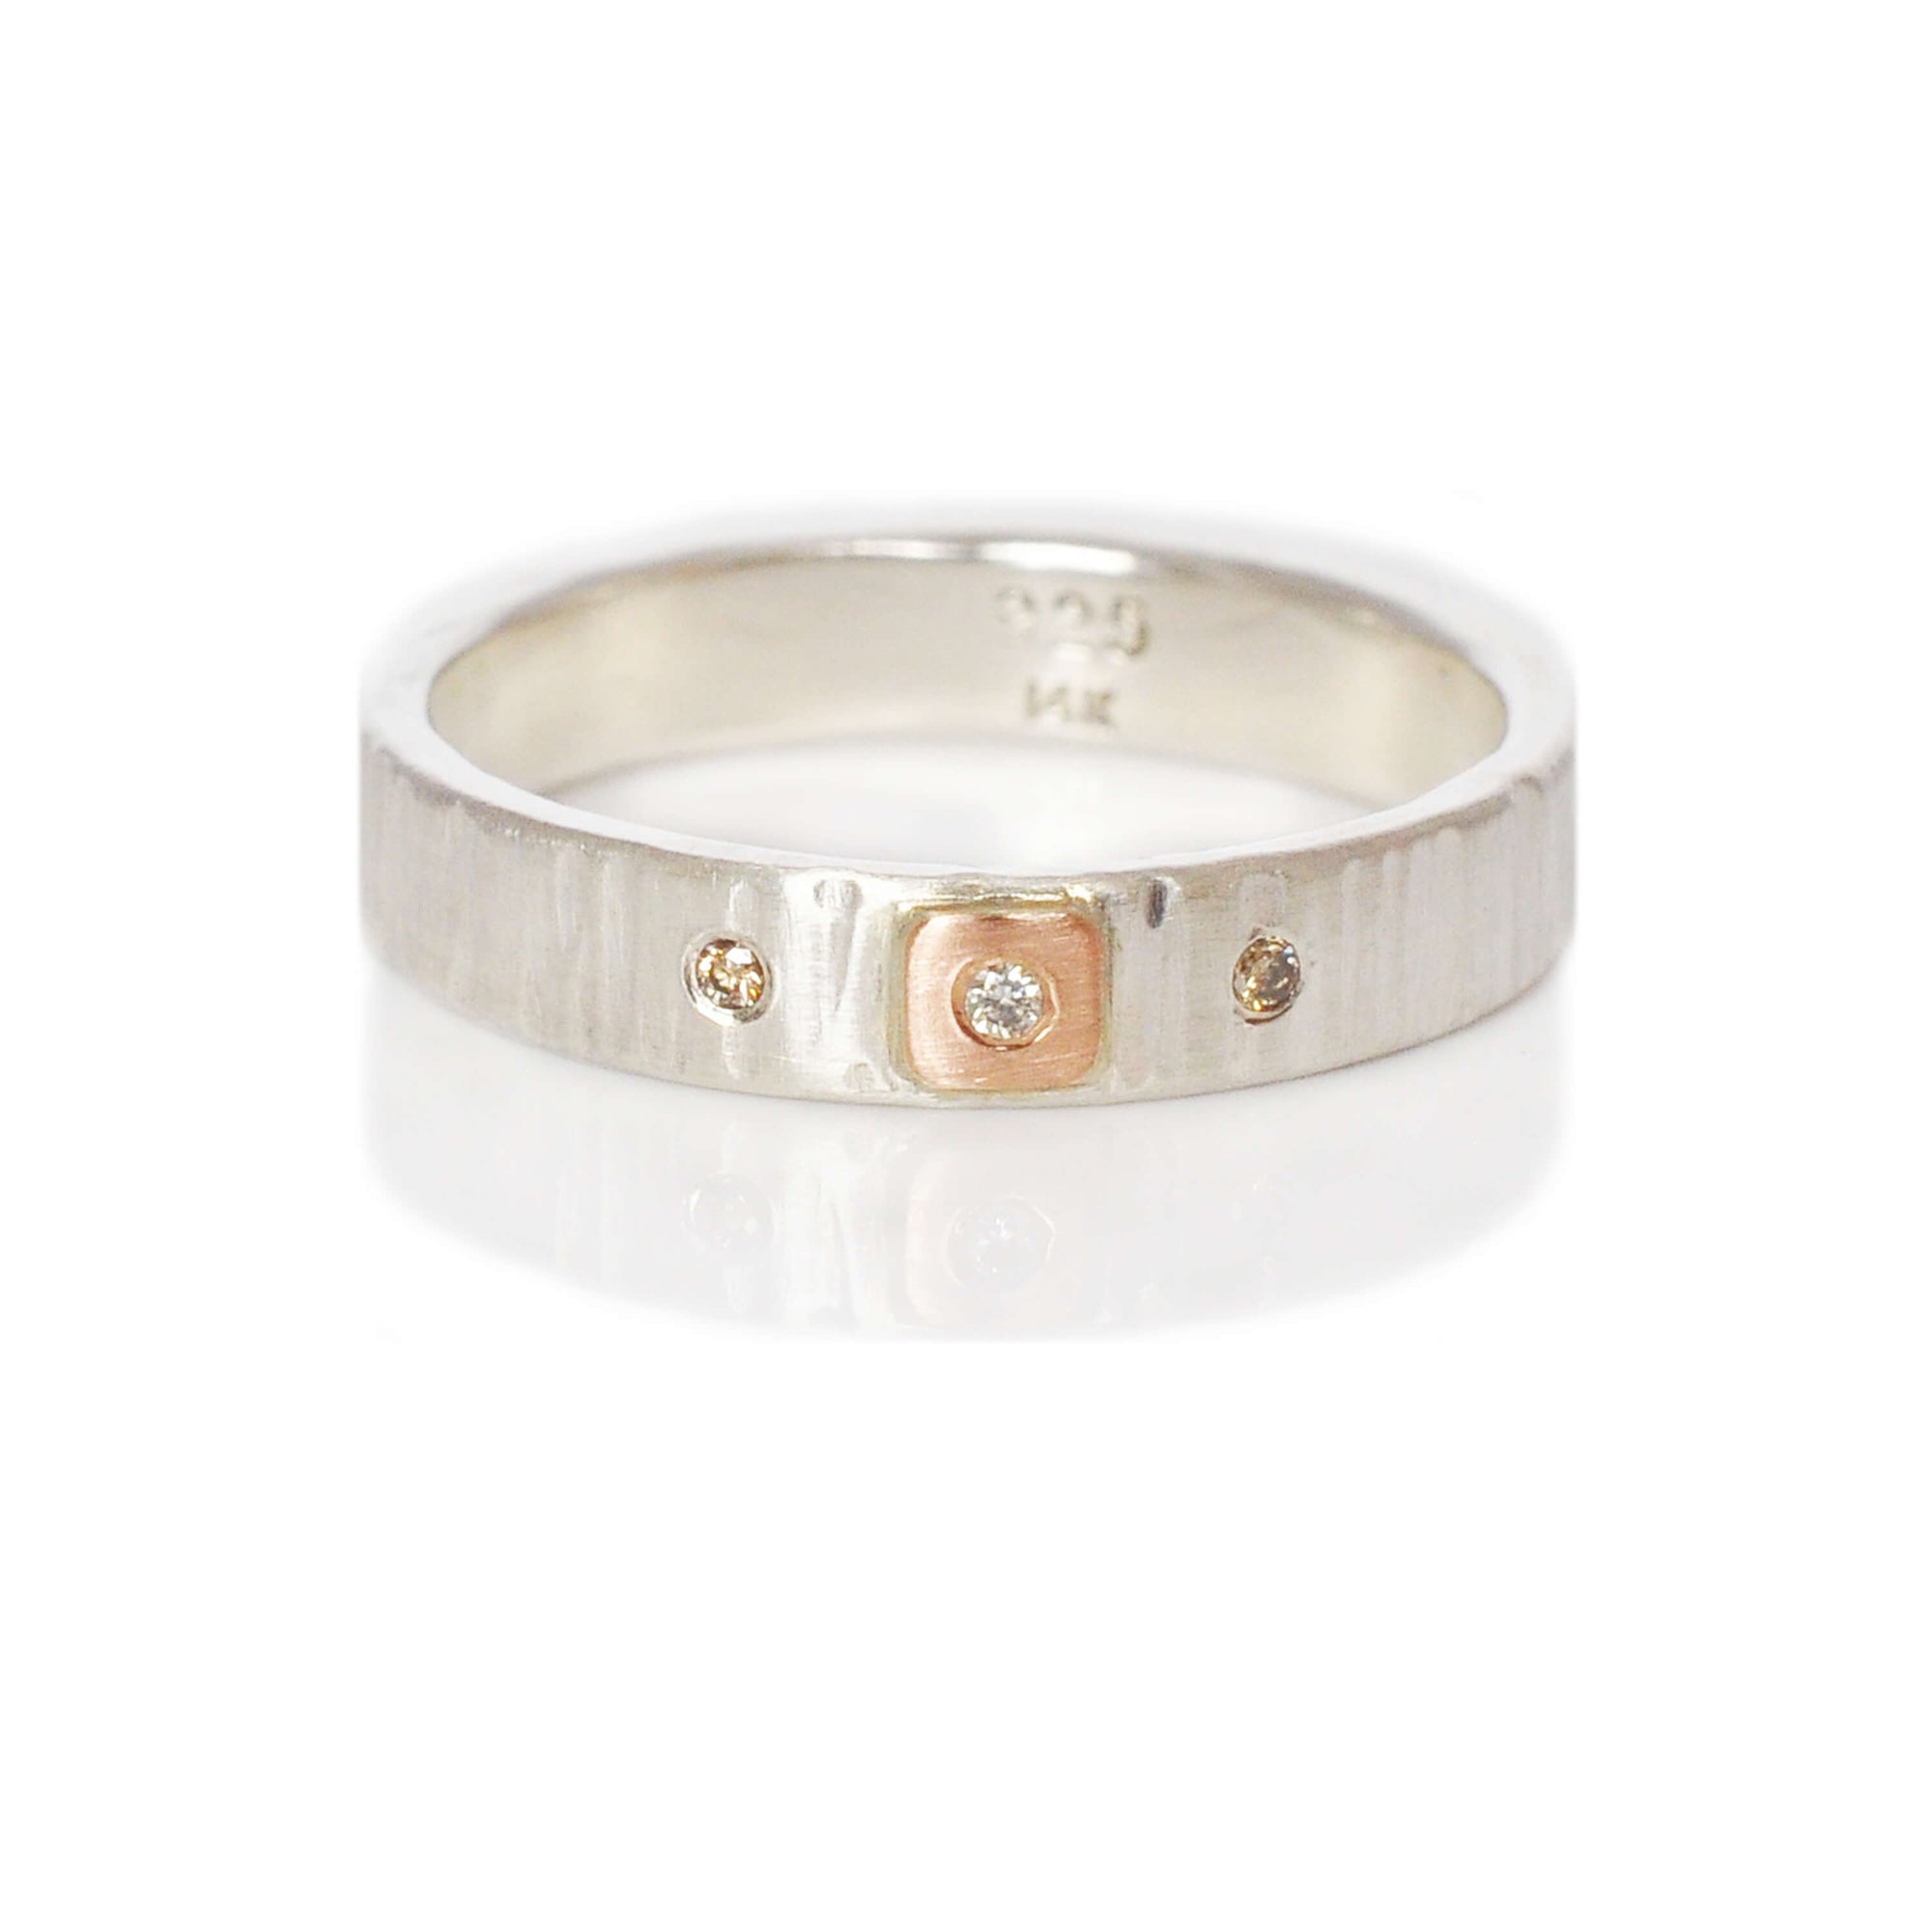 Linear hammered sterling silver band with rose gold and diamond accents. Handmade by EC Design Jewelry in Minneapolis, MN.